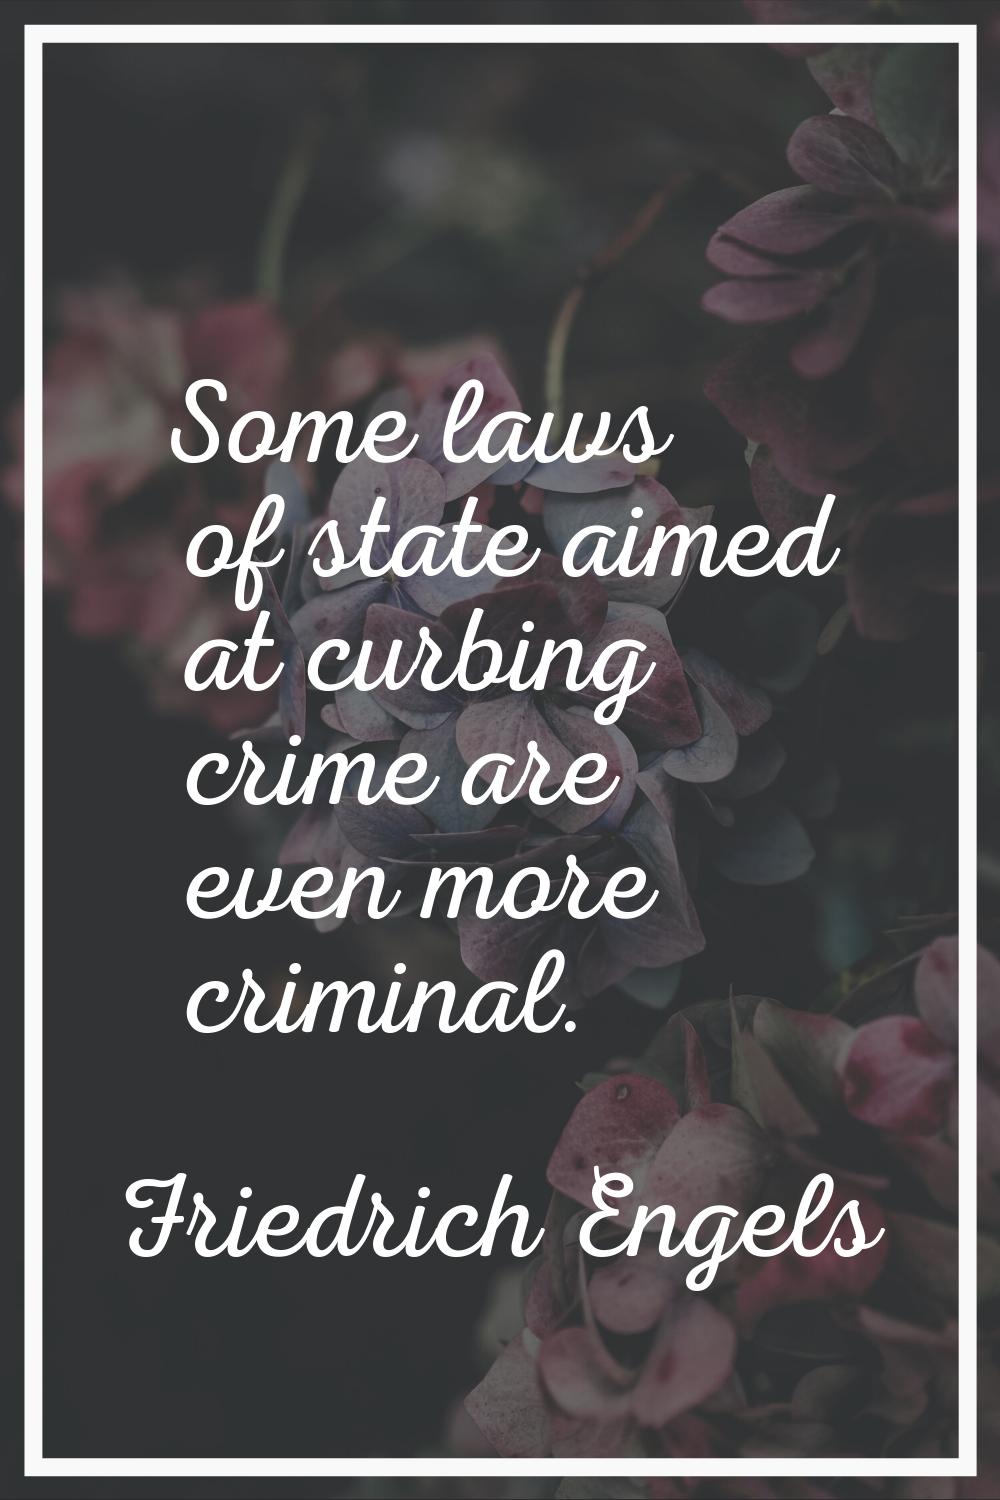 Some laws of state aimed at curbing crime are even more criminal.